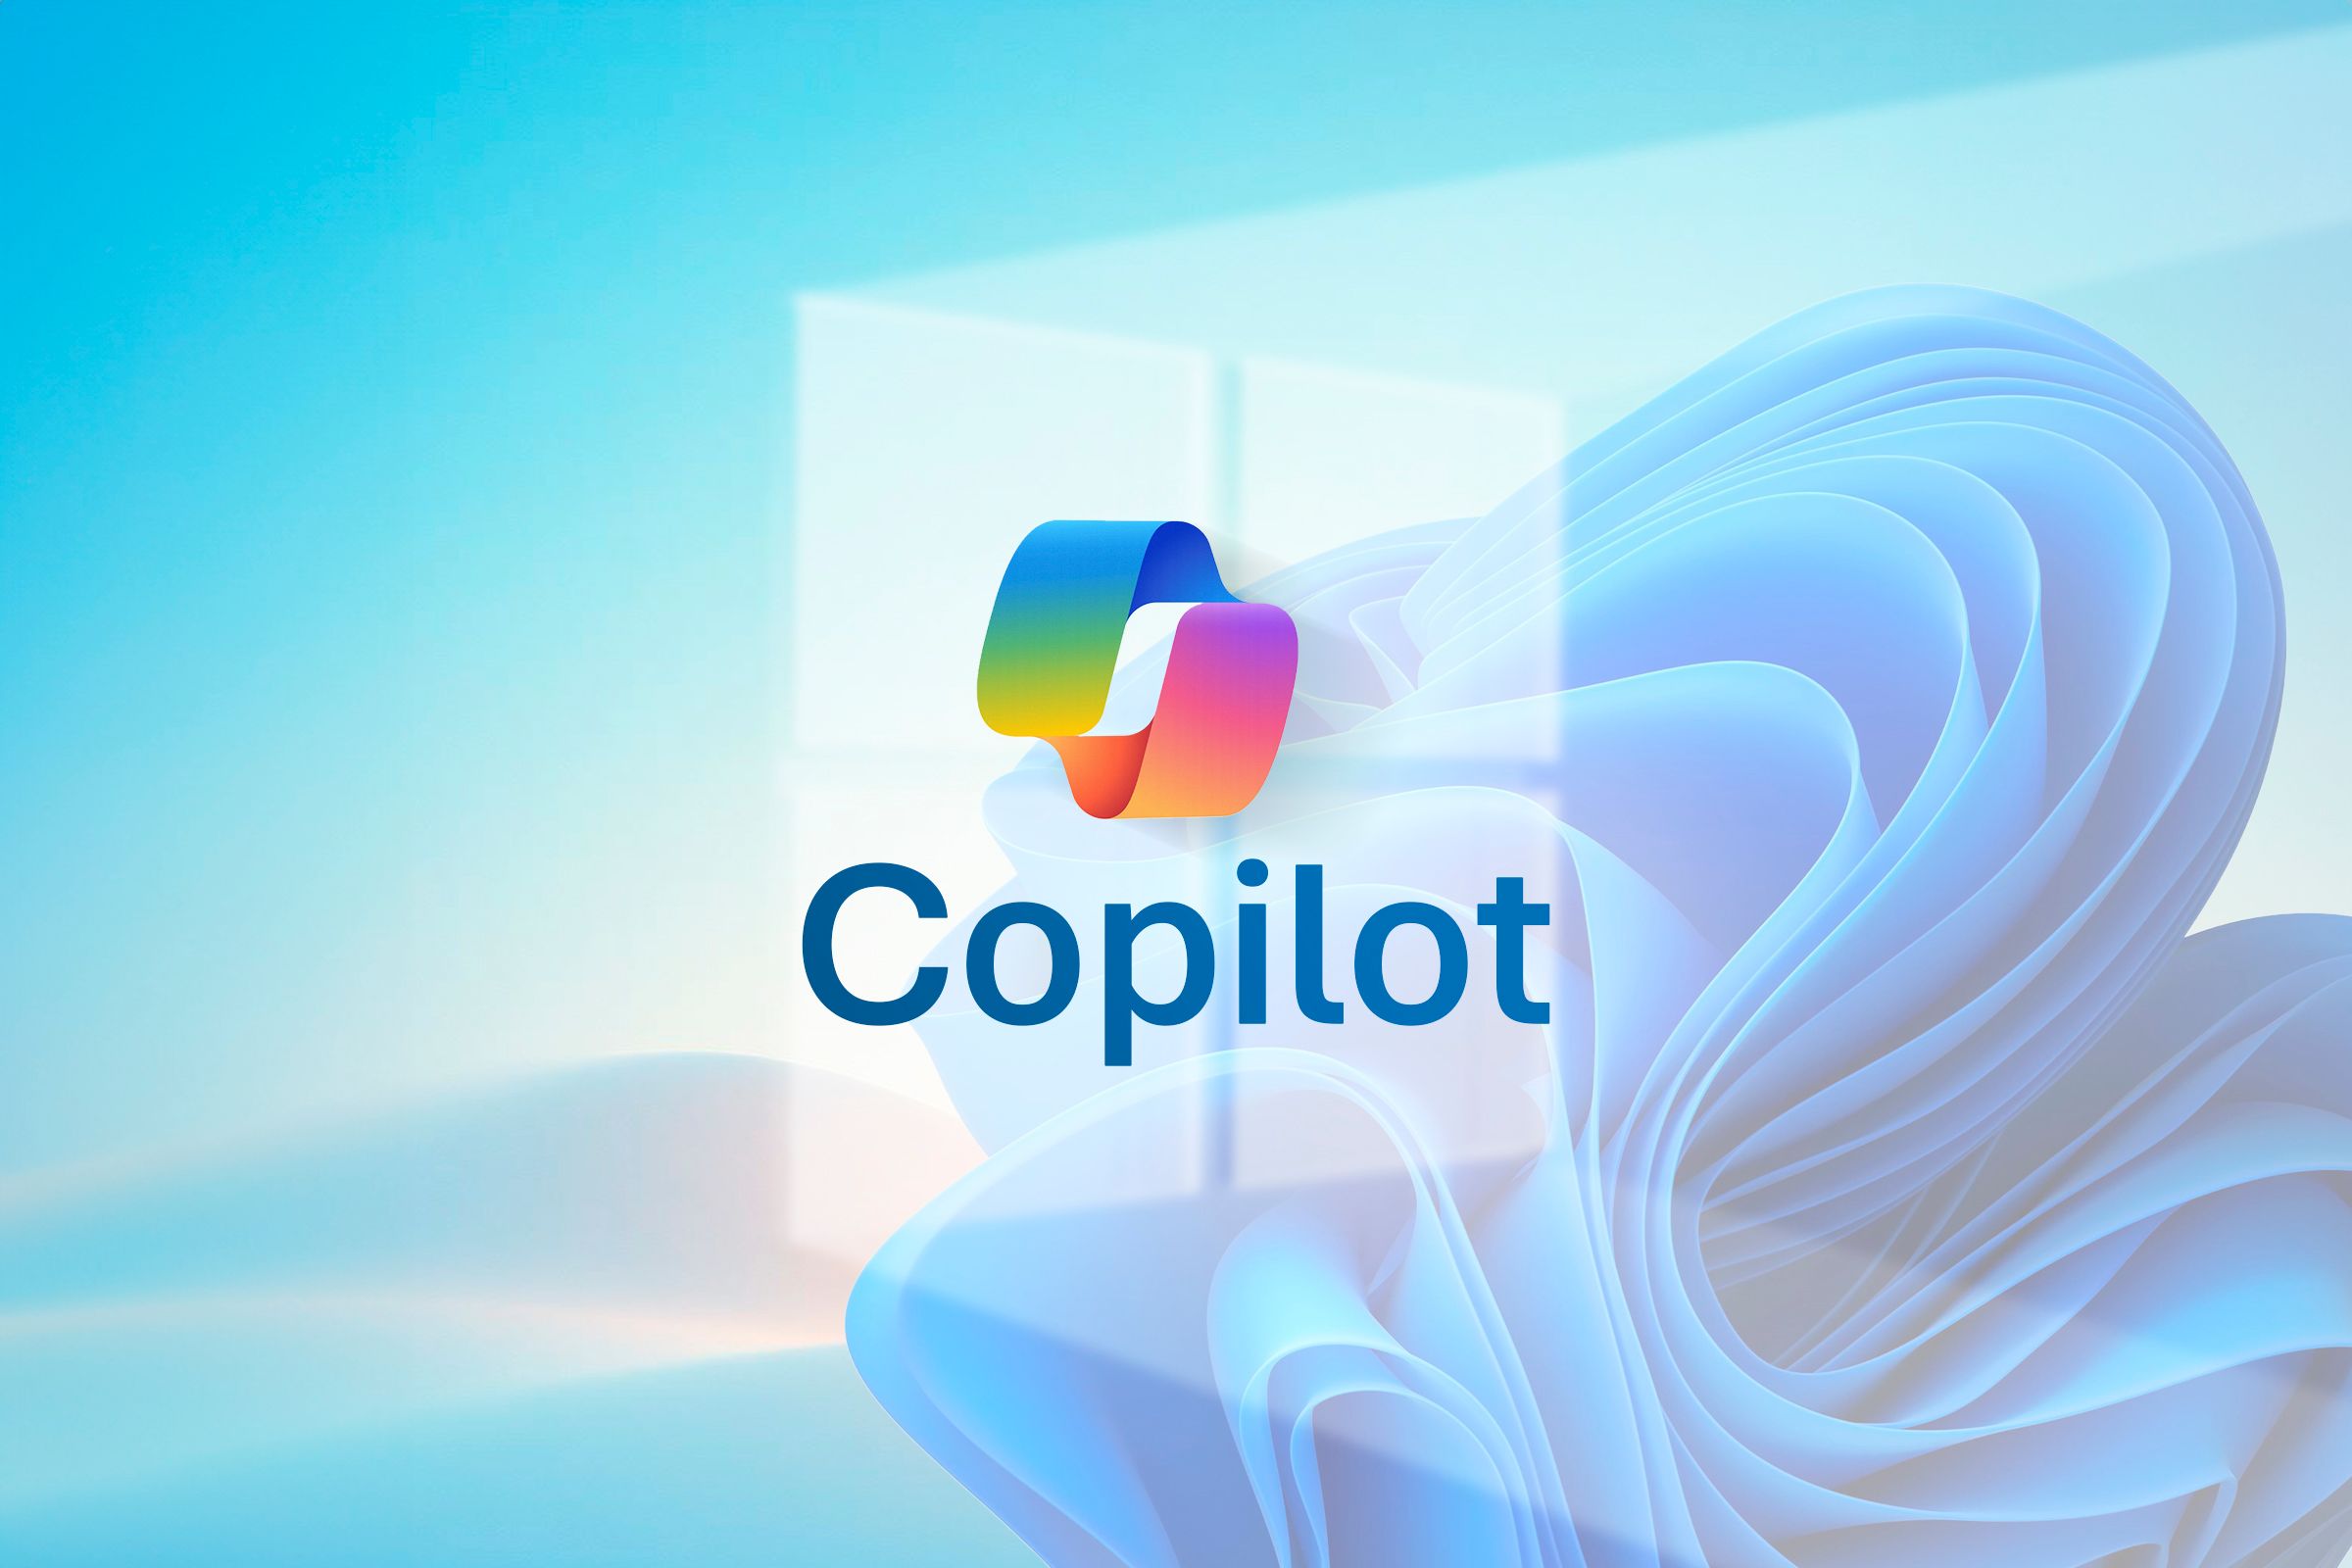 Copilot logo in the center with the Windows logo behind on a blue background.